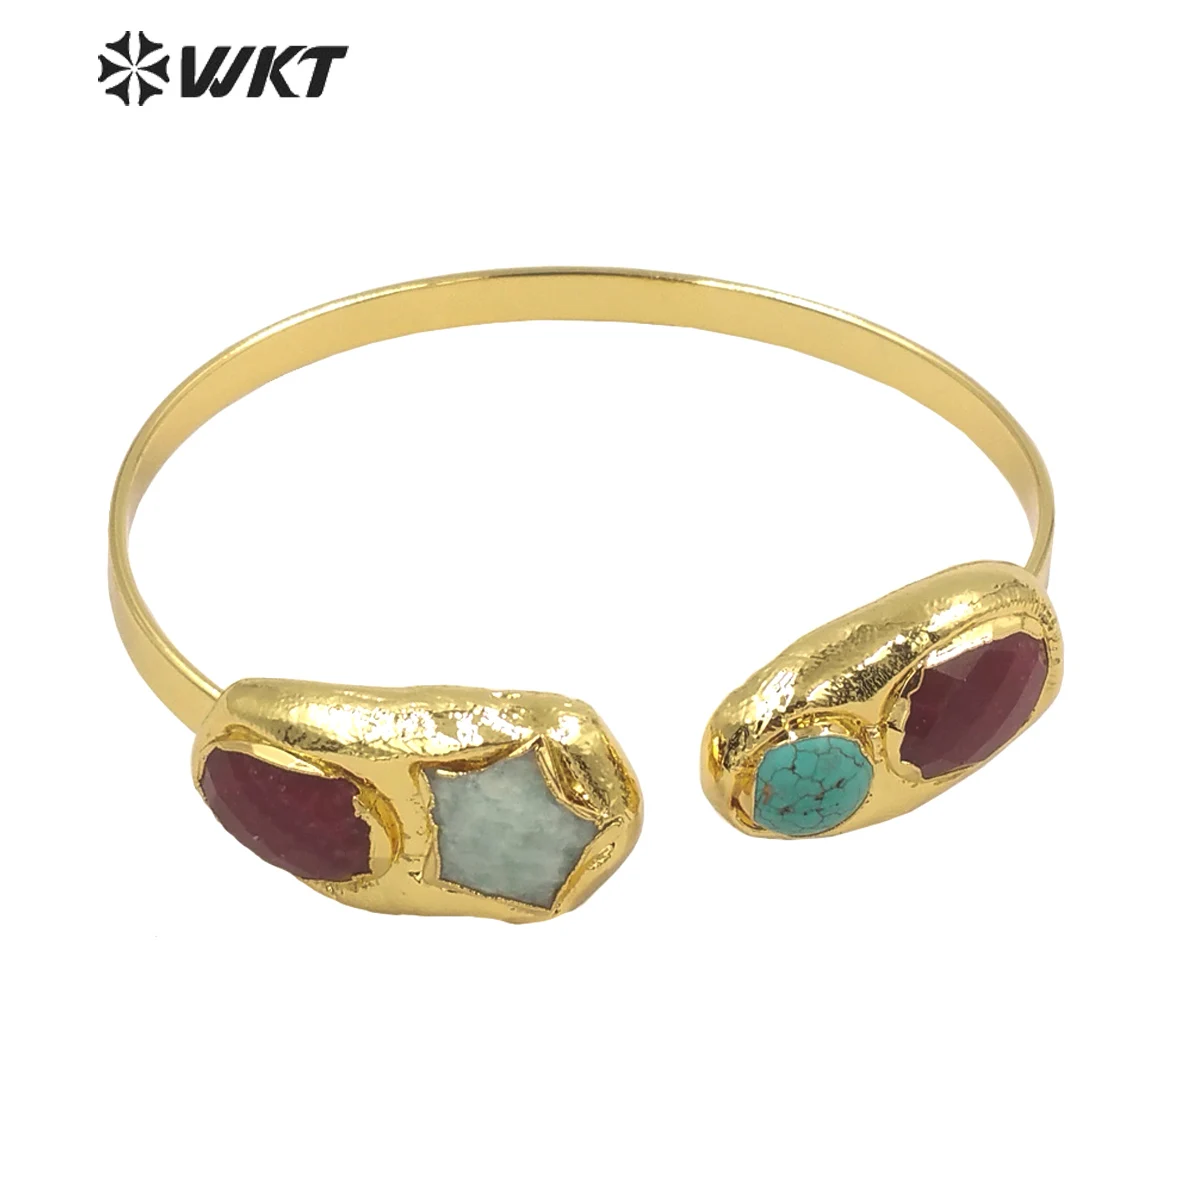 

WT-B601 WKT exclusive design fashion gold electroplated natural stone bangle women cuff open size star stone summer bangle